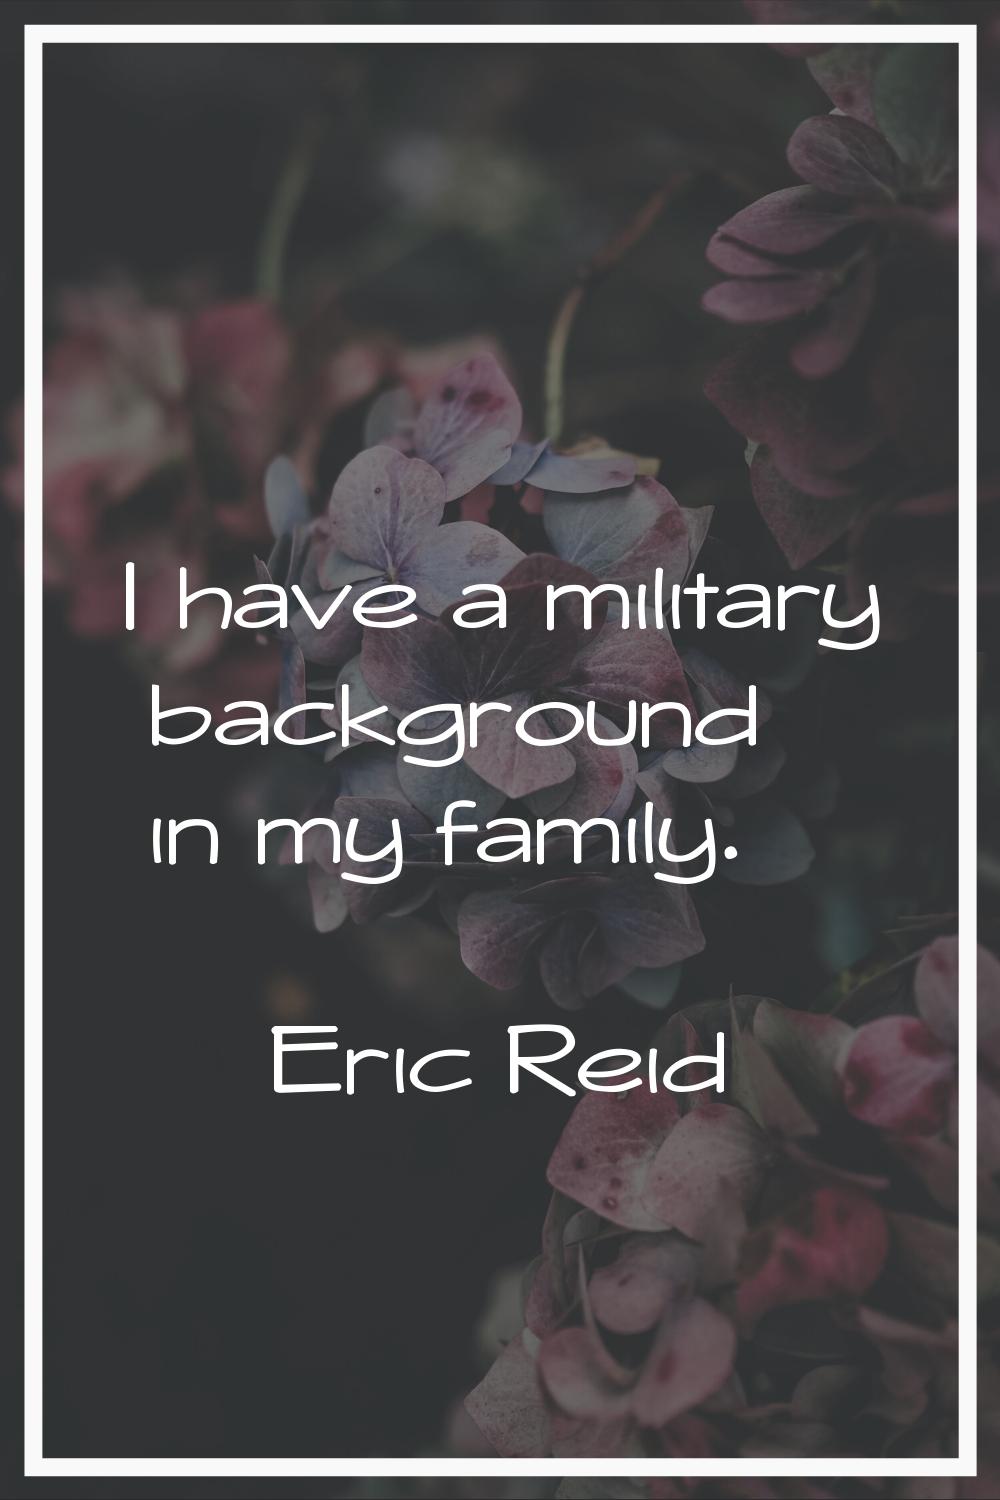 I have a military background in my family.